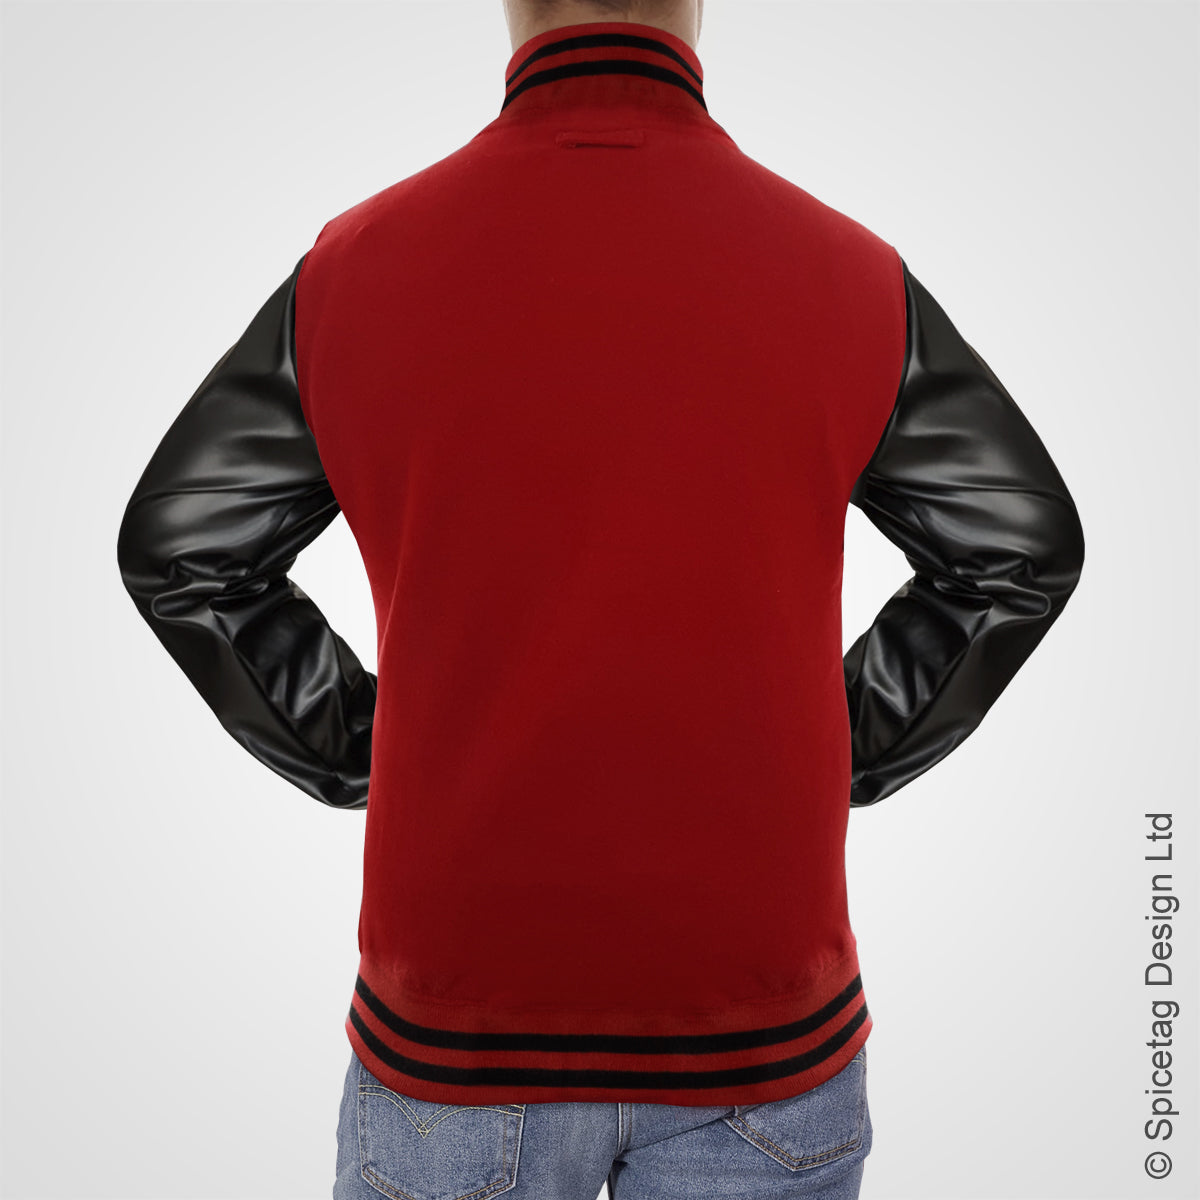 Red Varsity Jacket Faux Leather Sleeves College Top USA Letterman Coat Baseball Clothing Spicetag